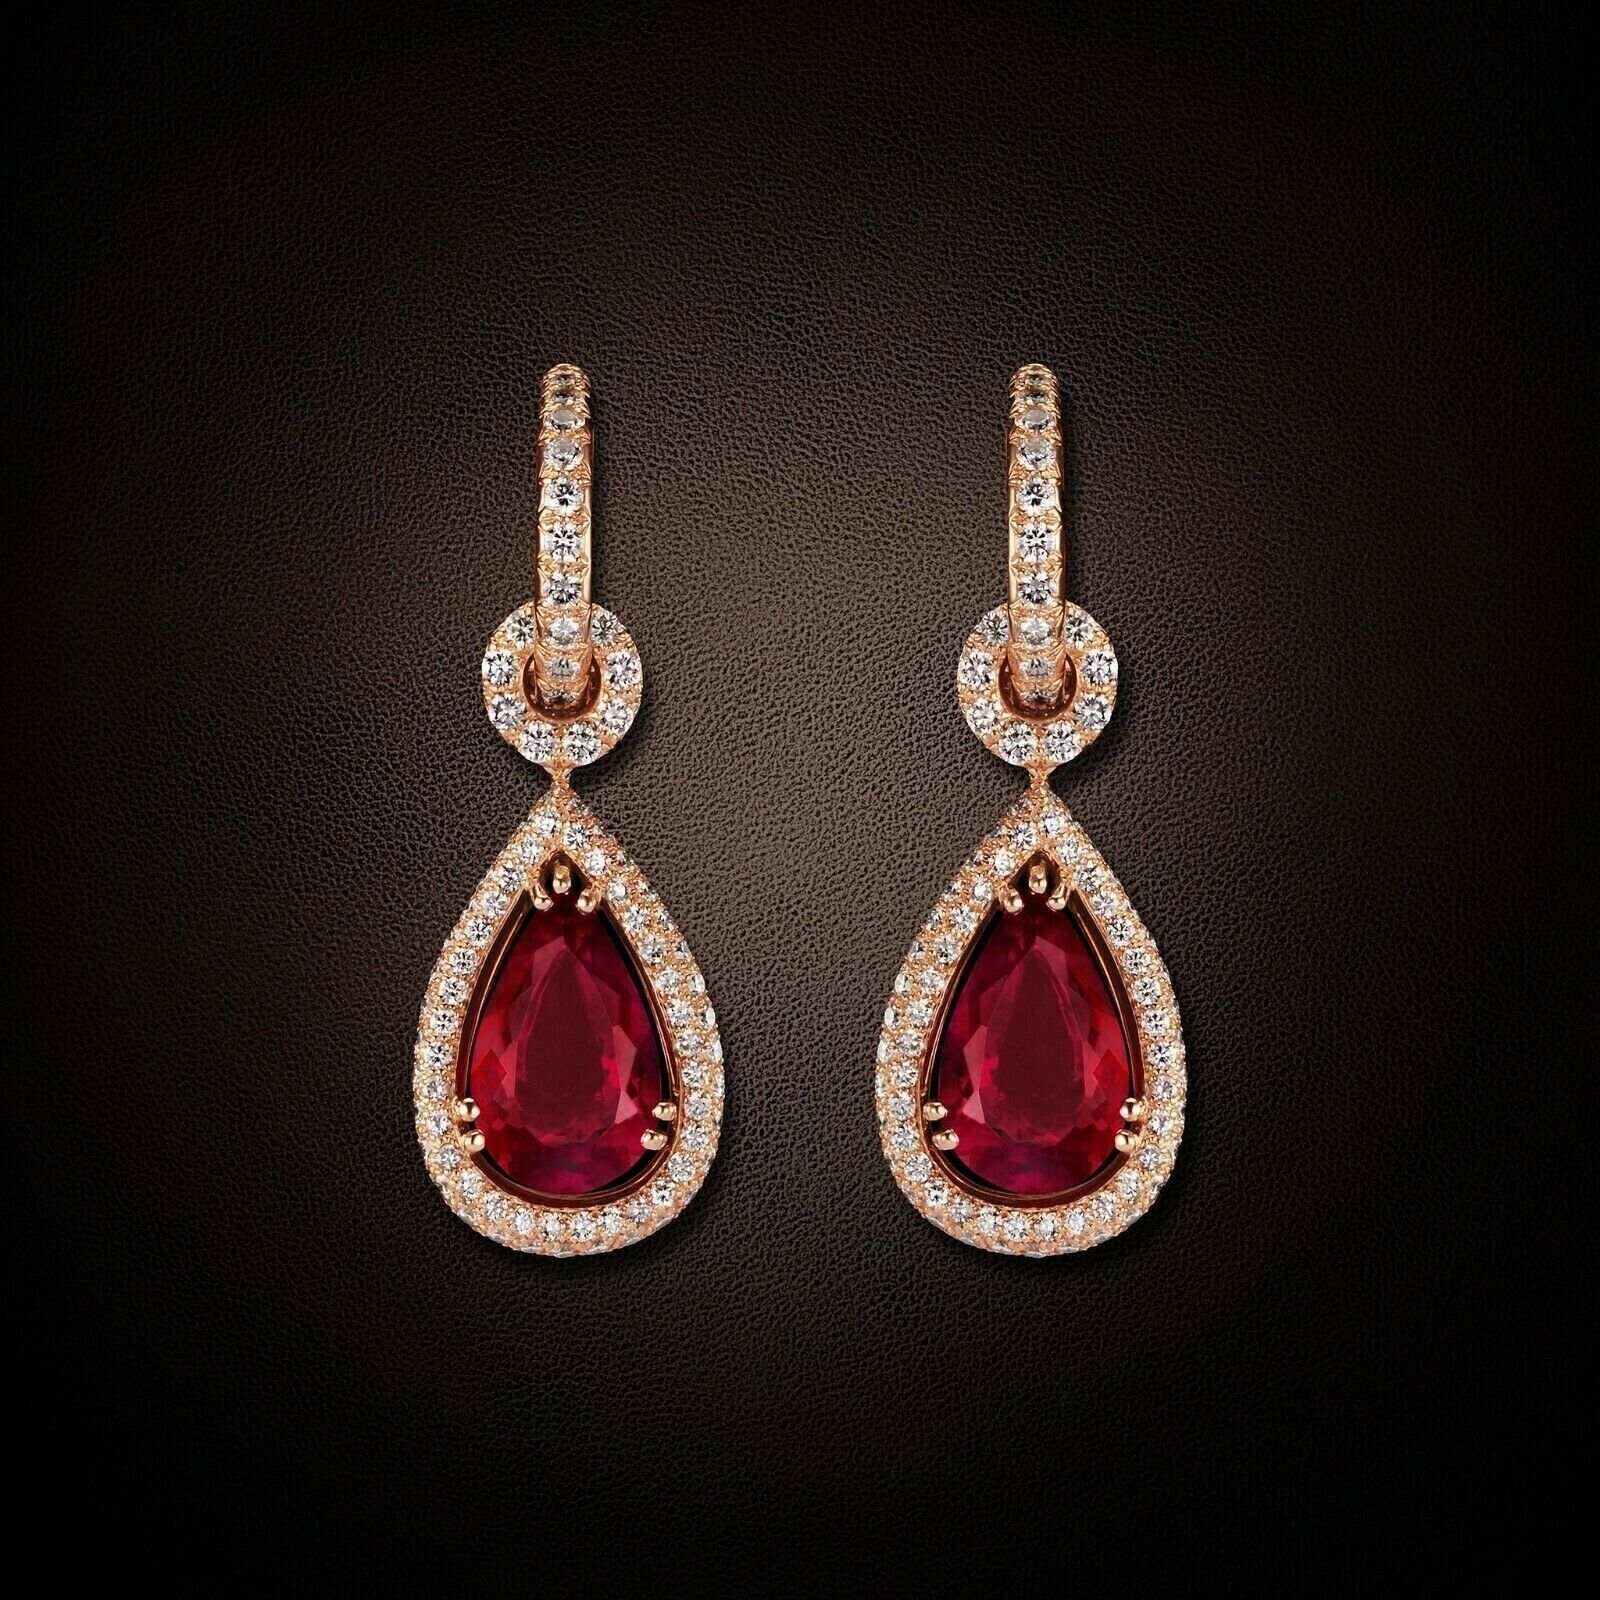 Primary image for 3Ct Simulated Garnet &Diamond Drop/Dangle Earrings 14k Yellow Gold Plated Silver